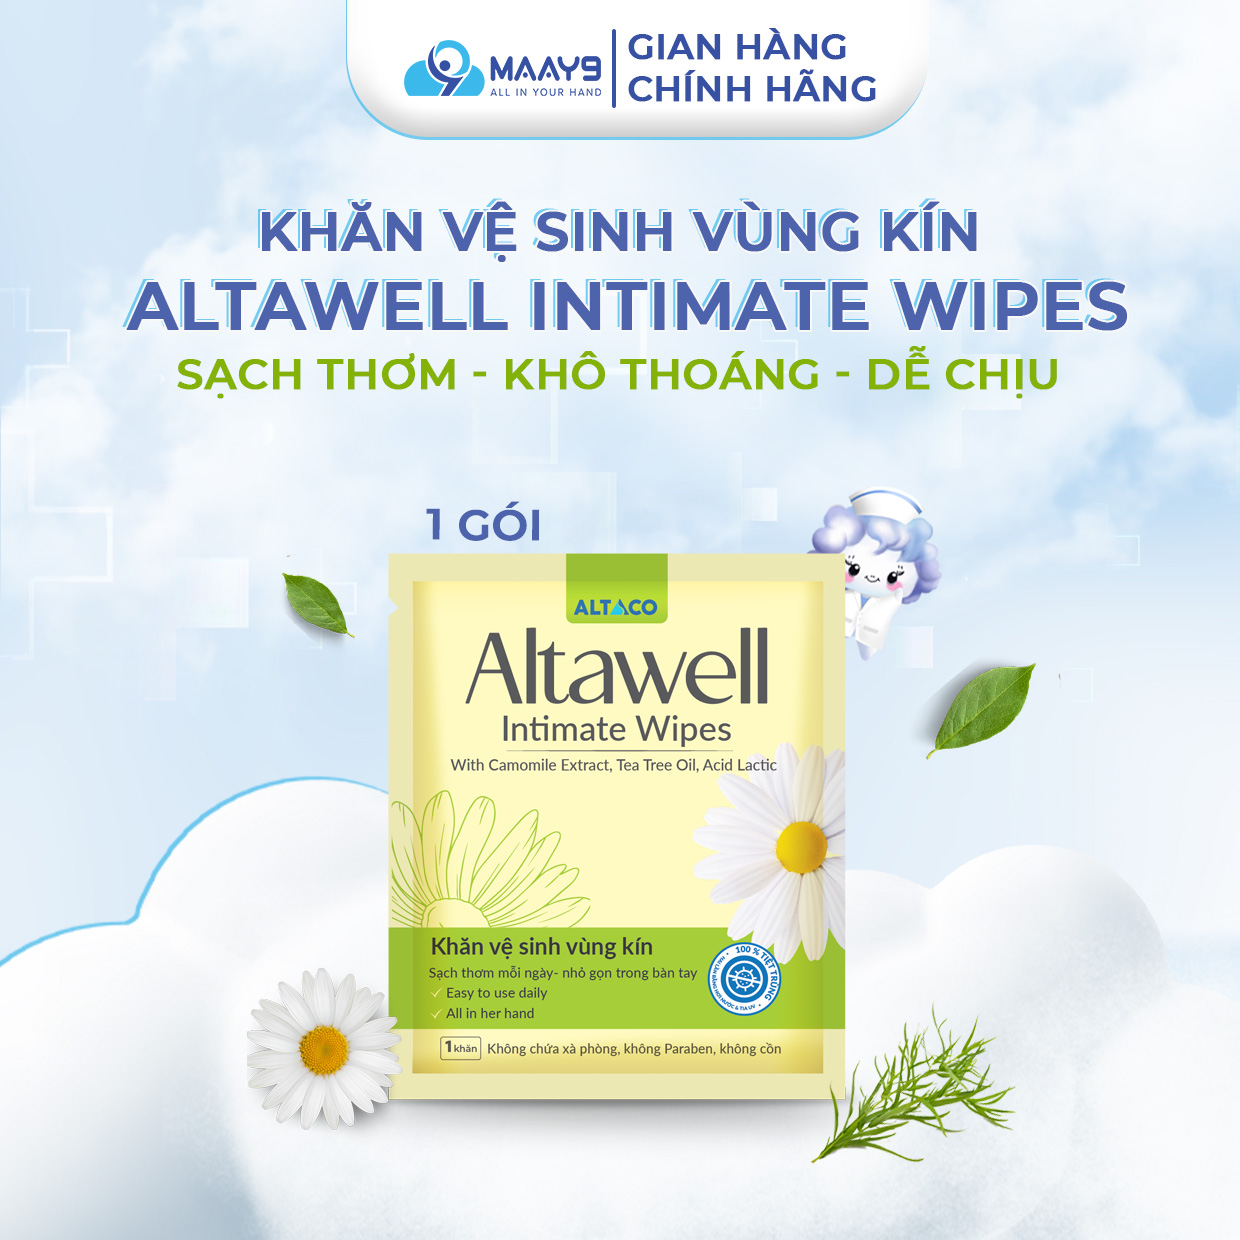 Altawell intimate wipes, 1 wipe